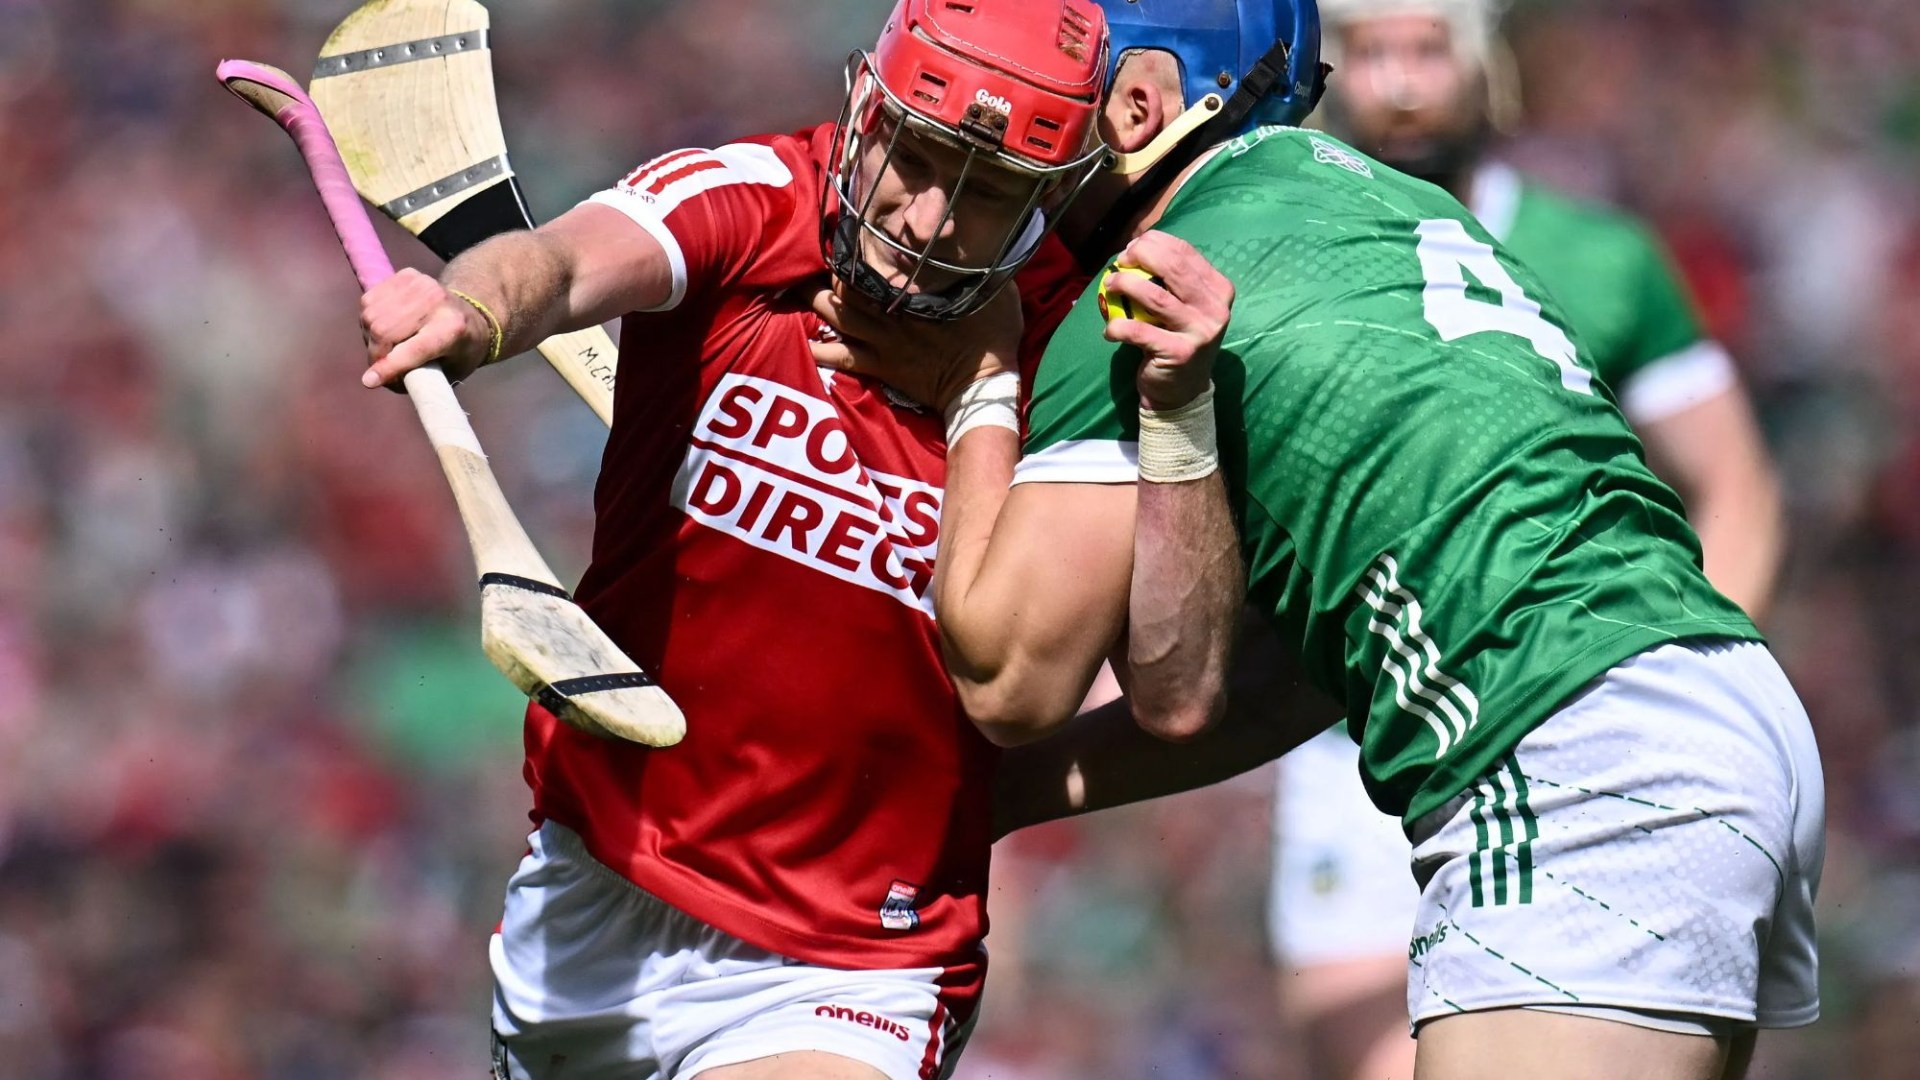 Moment Cork commentator goes berserk after full-time whistle goes in All-Ireland semi-final win over Limerick [Video]